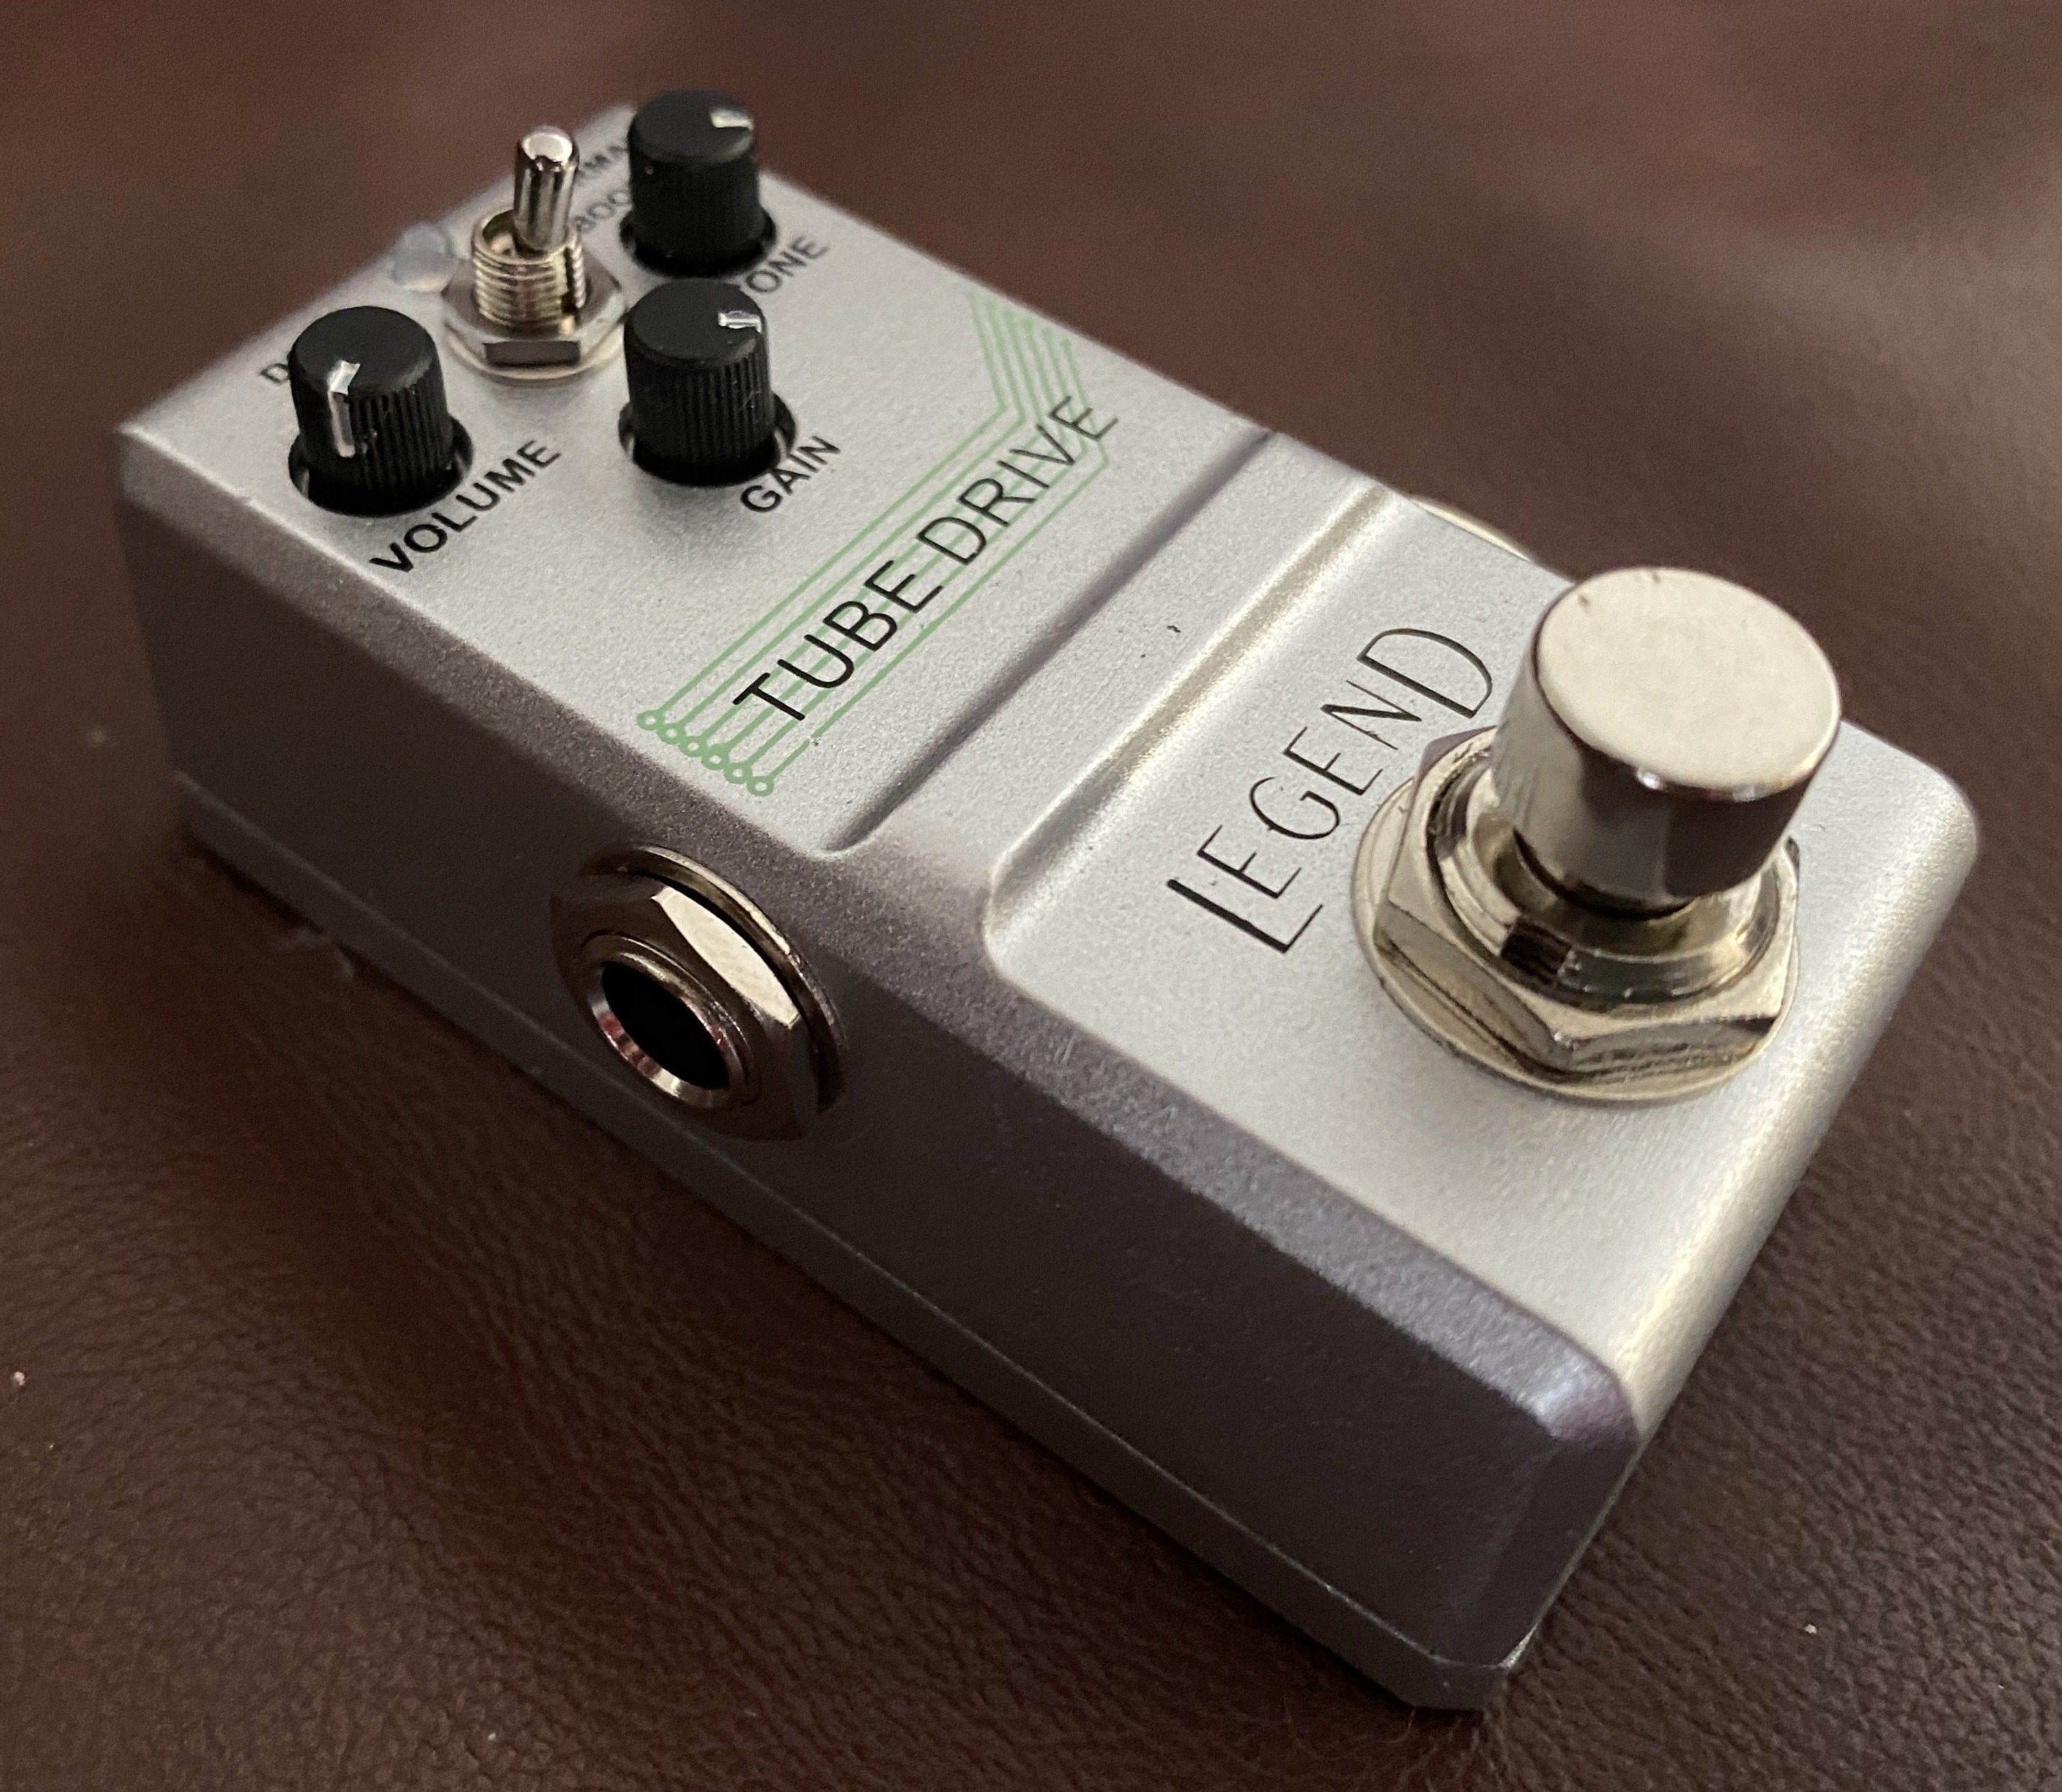 SMJ LEGEND Series Tube Drive Pedal, Accessory for sale at Richards Guitars.